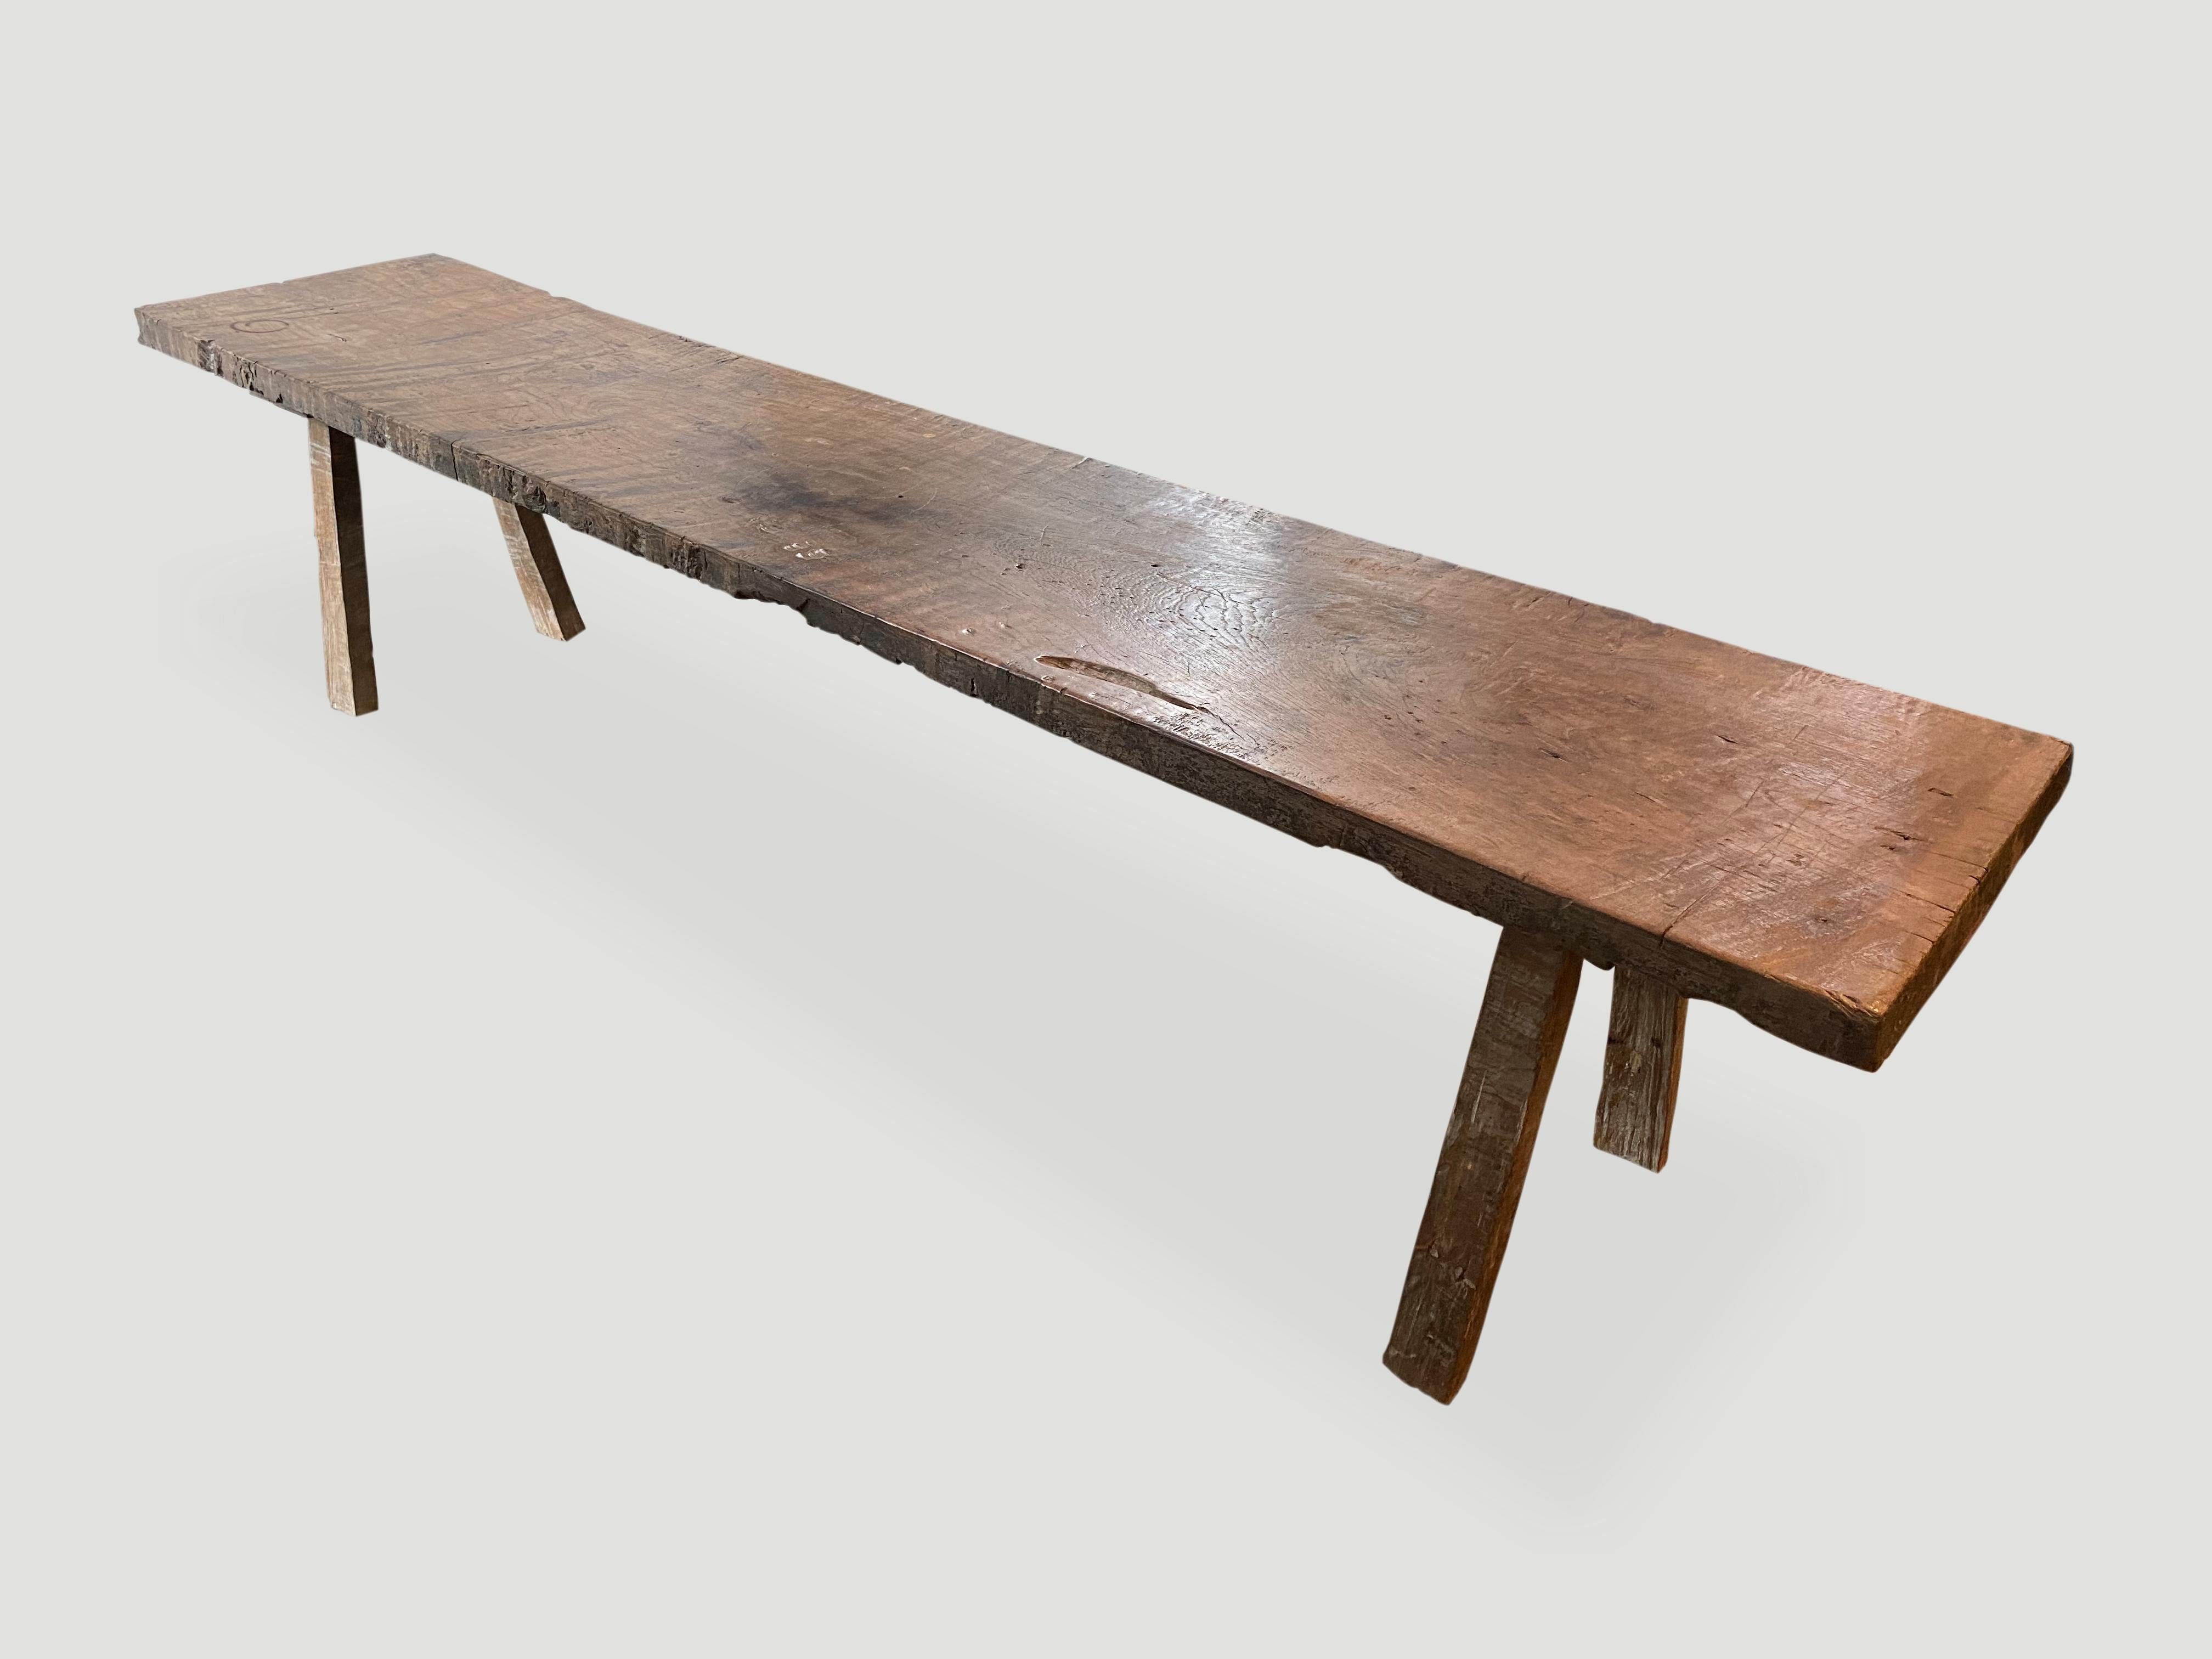 Antique single slab, natural aged teak wood bench. Celebrating the cracks and crevices and all the other marks that time and loving use have left behind.

This bench or coffee table was sourced in the spirit of wabi-sabi, a Japanese philosophy